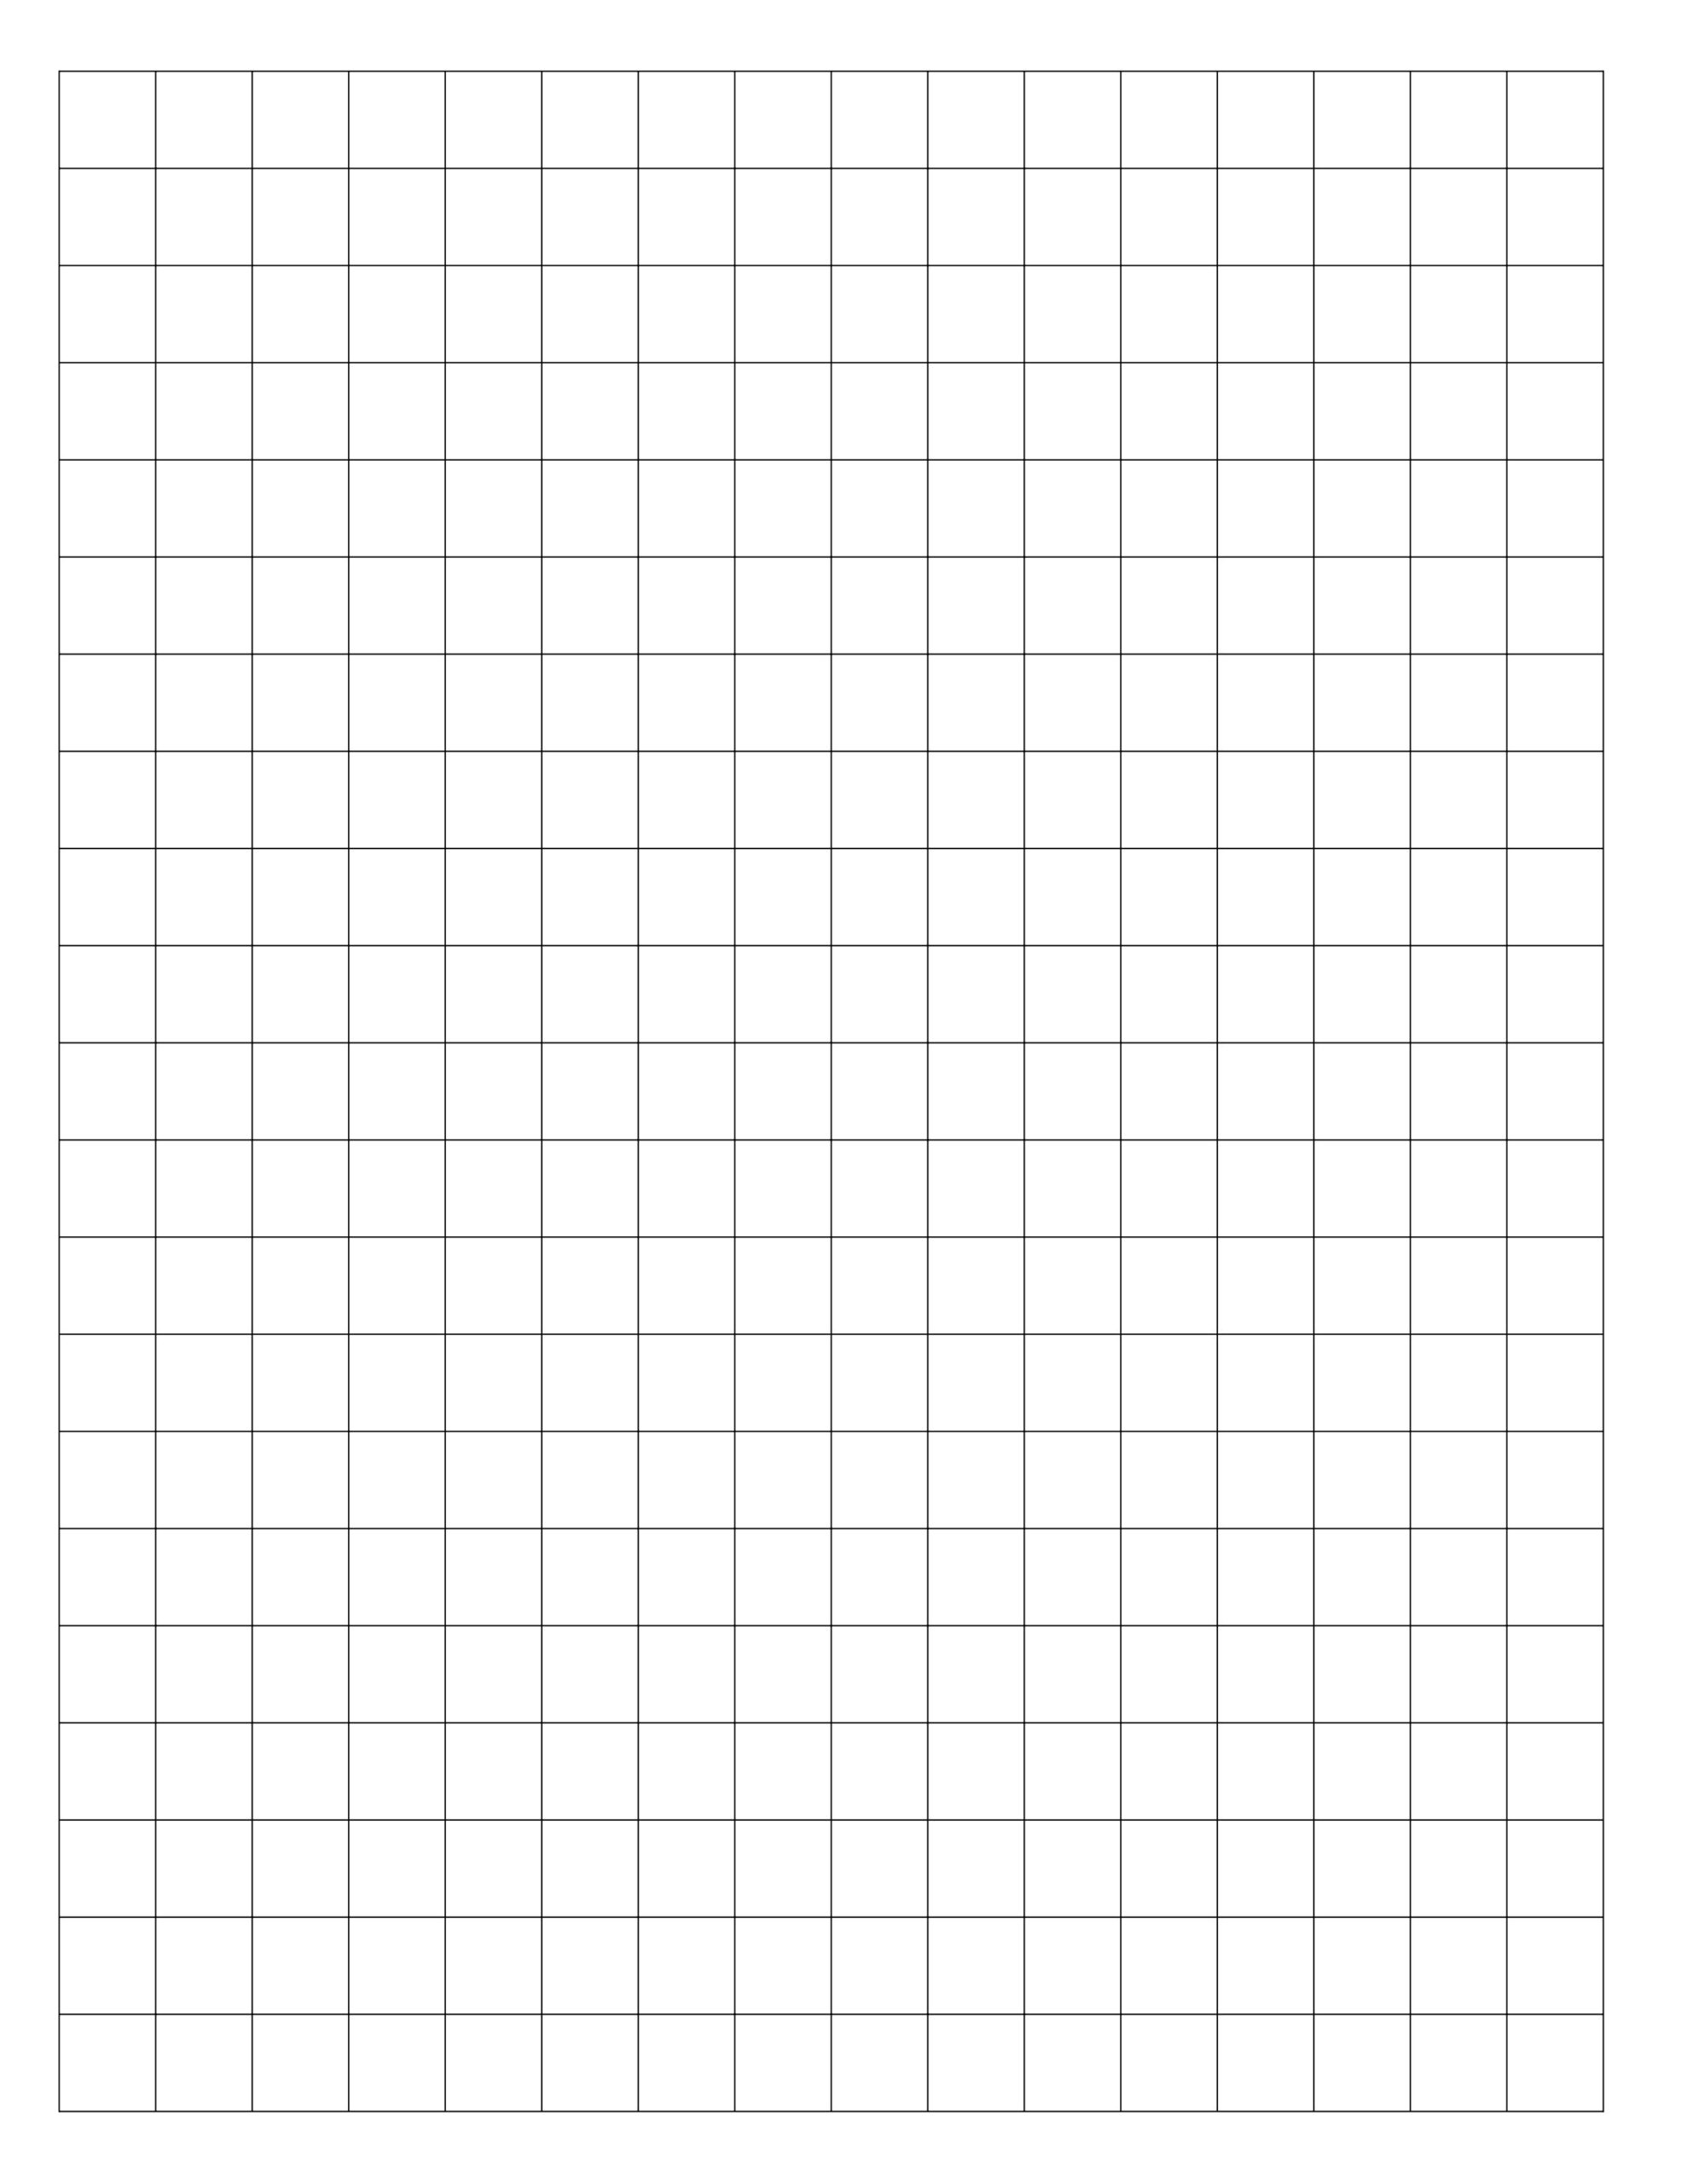 Free Here Squared Ruled Paper 1 2 Inch For Completed Book That I Love 